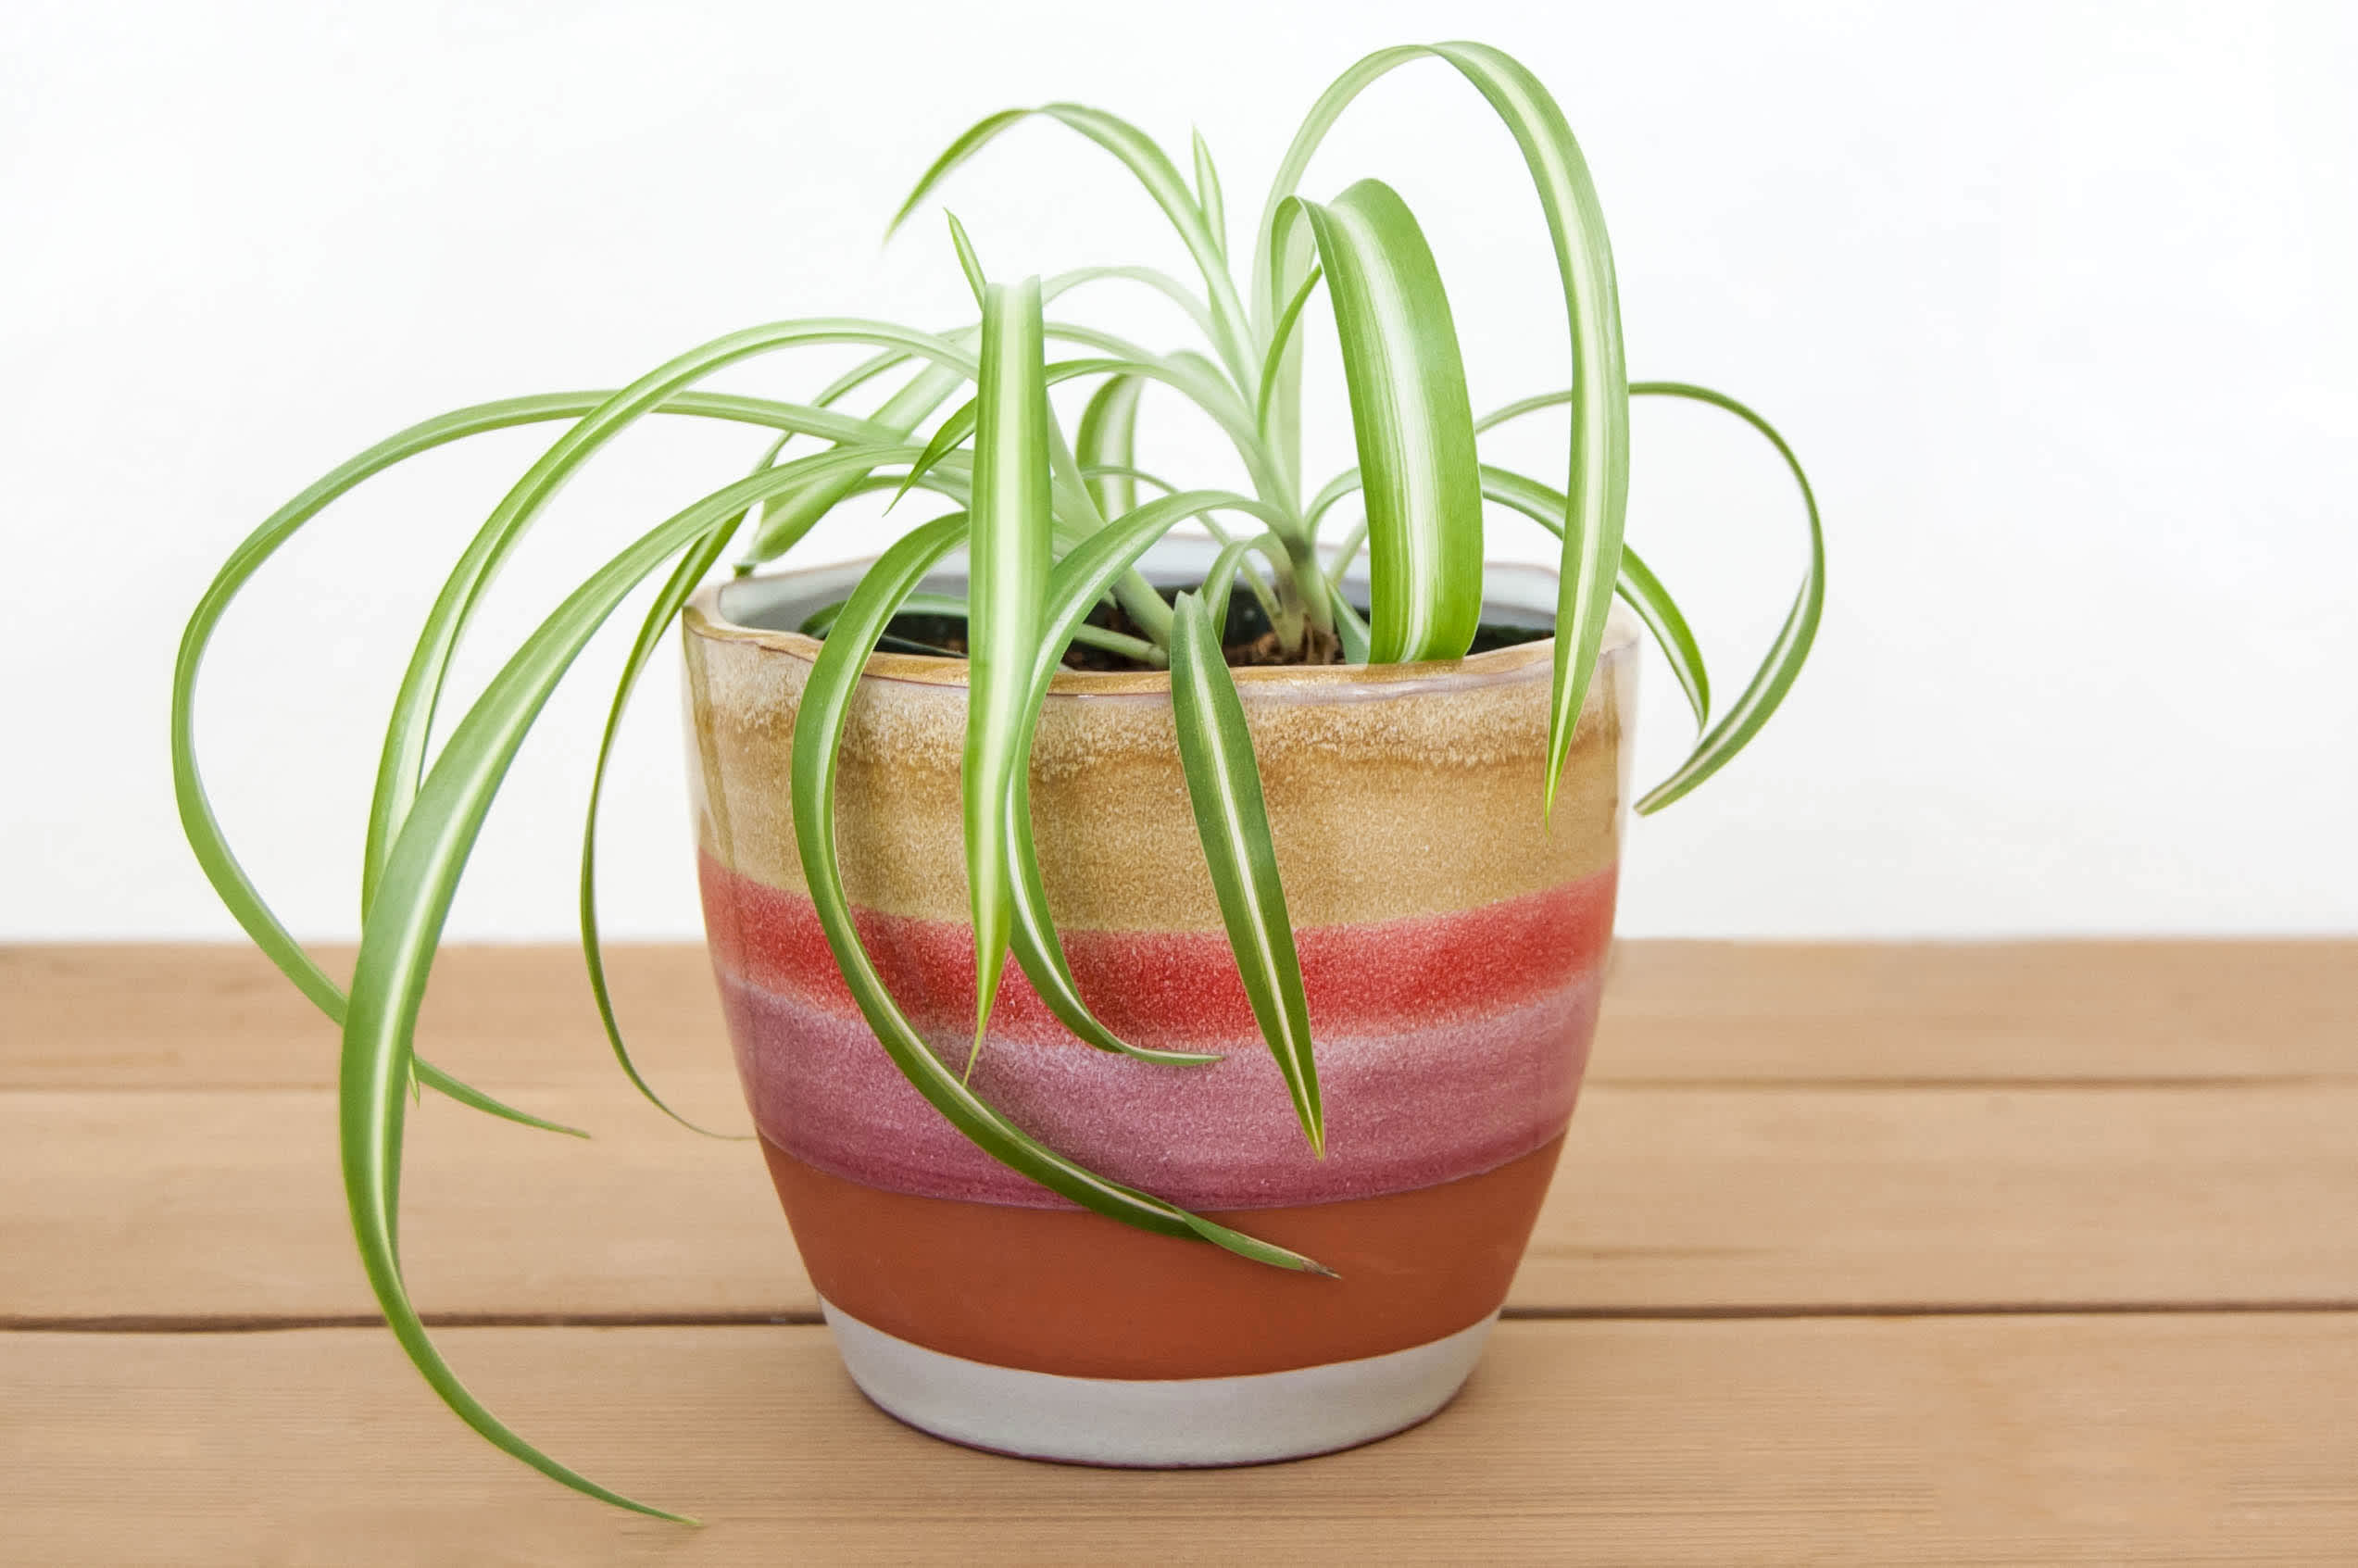 Spider Plant Care - How Grow & Maintain an Airplane Apartment Therapy